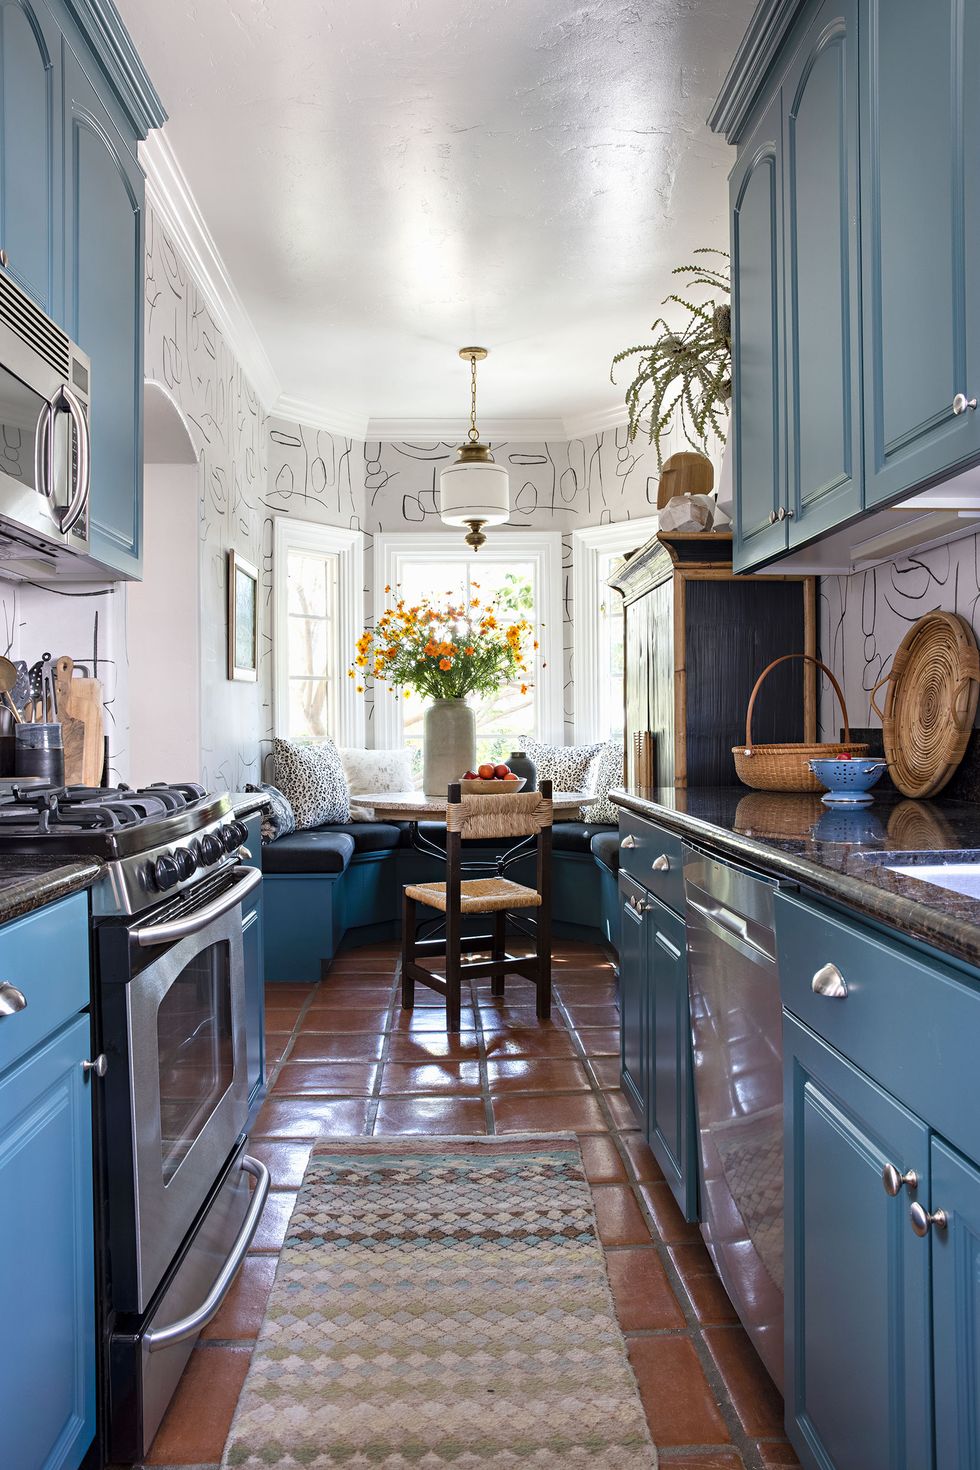 These 25 Kitchen Floor Ideas Are Tasteful AND Practical